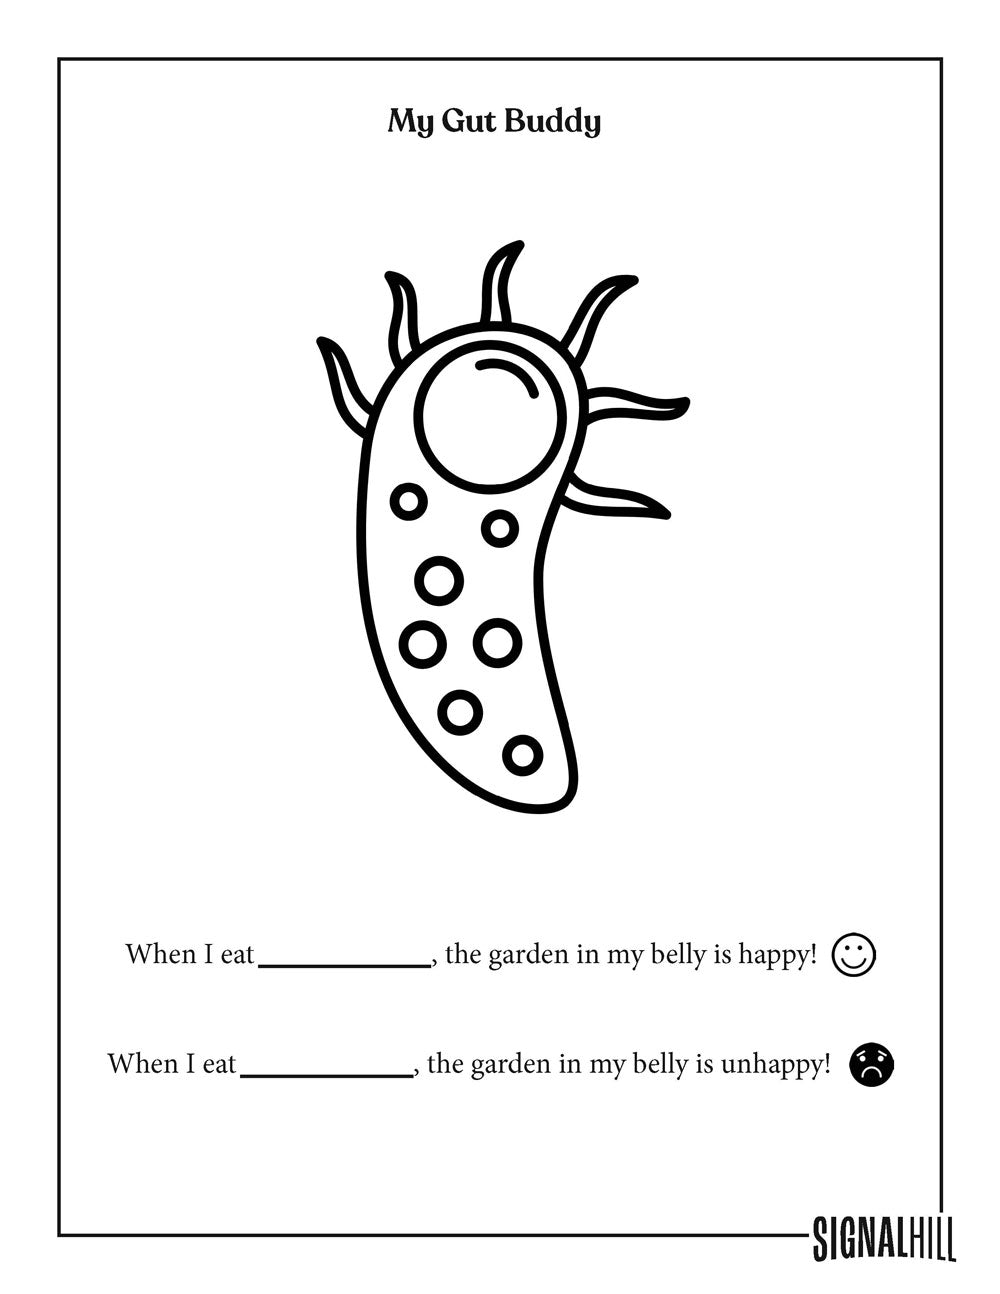 Lesson Plan 3: A Garden in My Belly